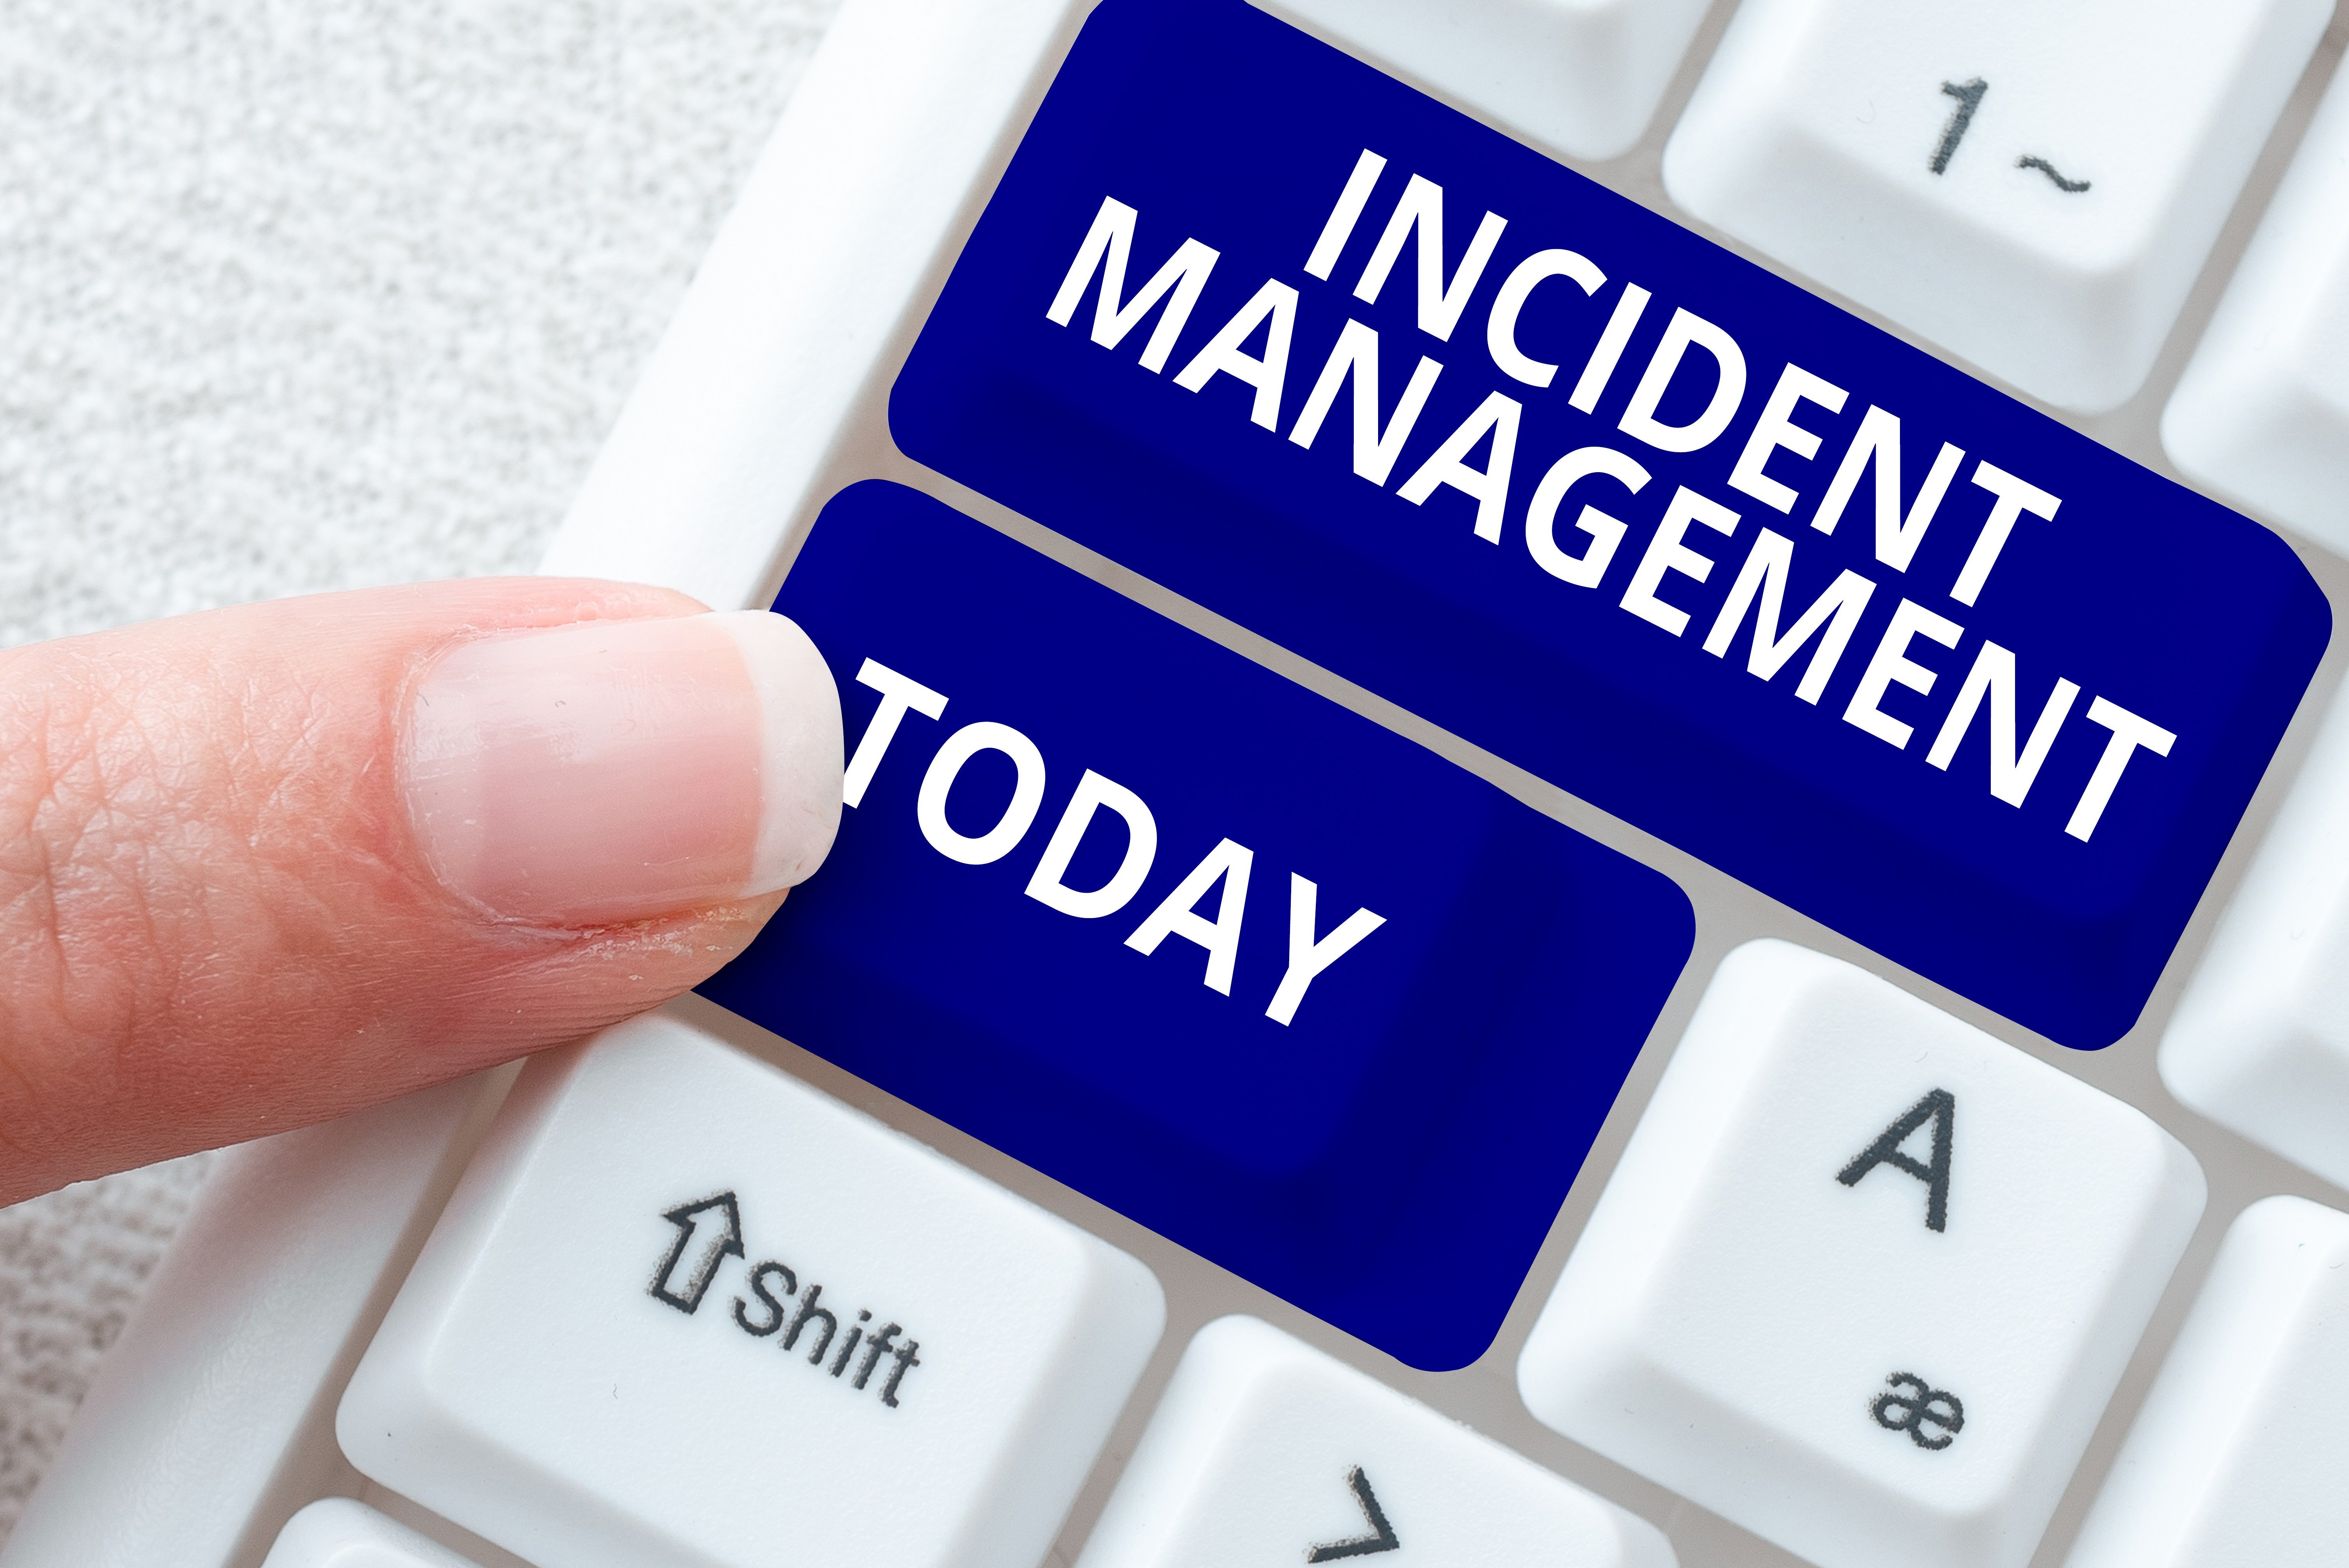 Tech Service Today says Fast Incident Management is more important than the cost of downtime